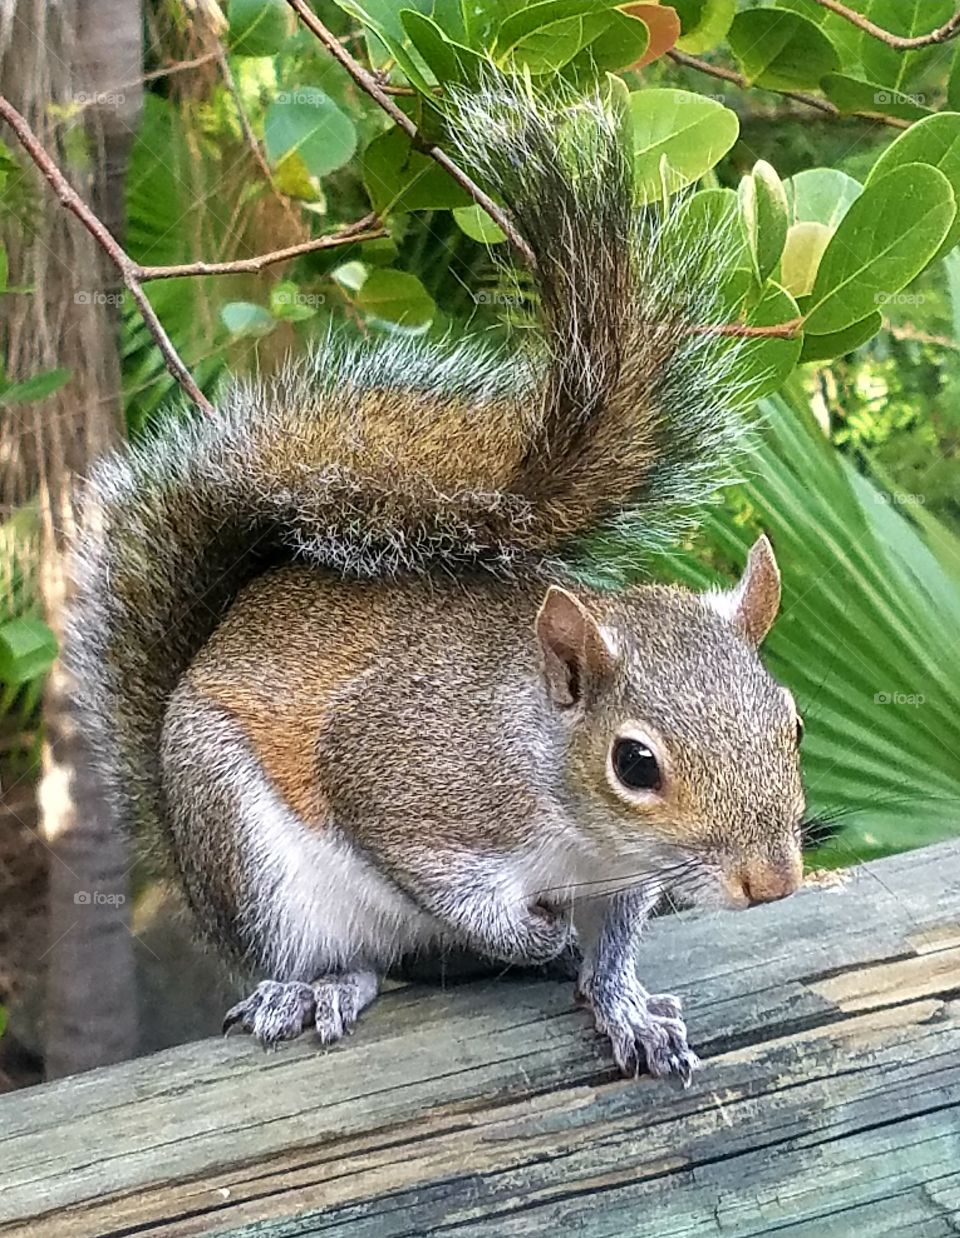 squirrely